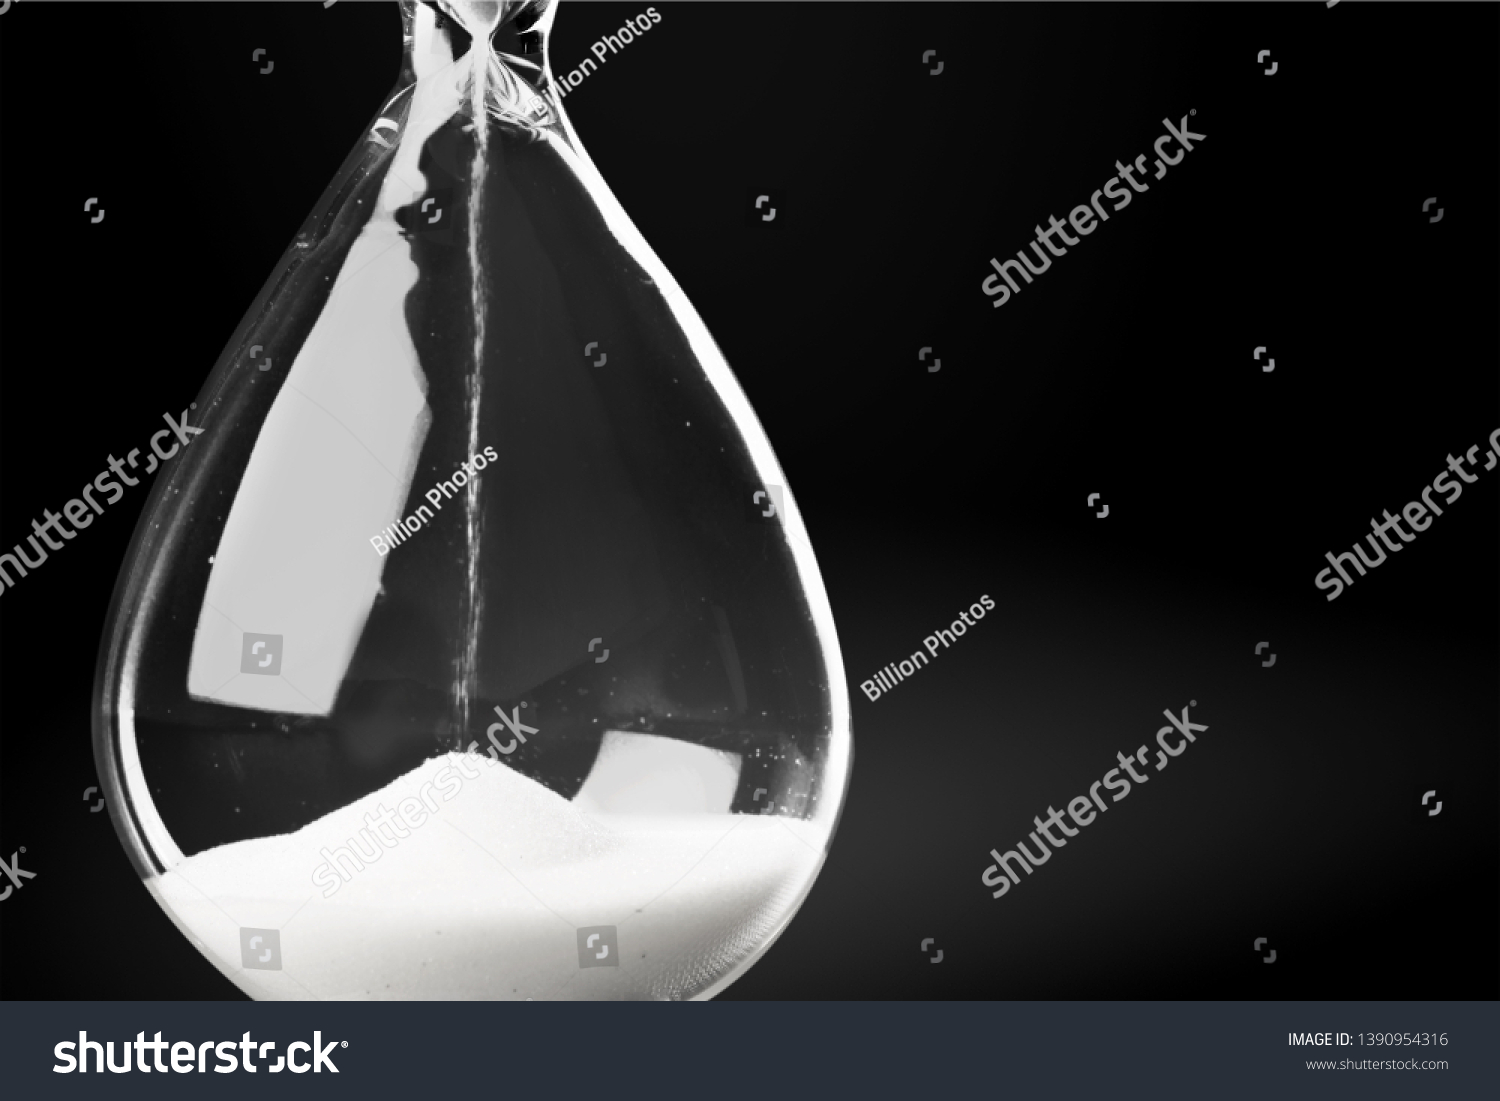 Hourglass as time passing concept for business deadline, urgency and running out of time. Sandglass, egg timer on dark background showing the last second or last minute or time out.  With copy space #1390954316